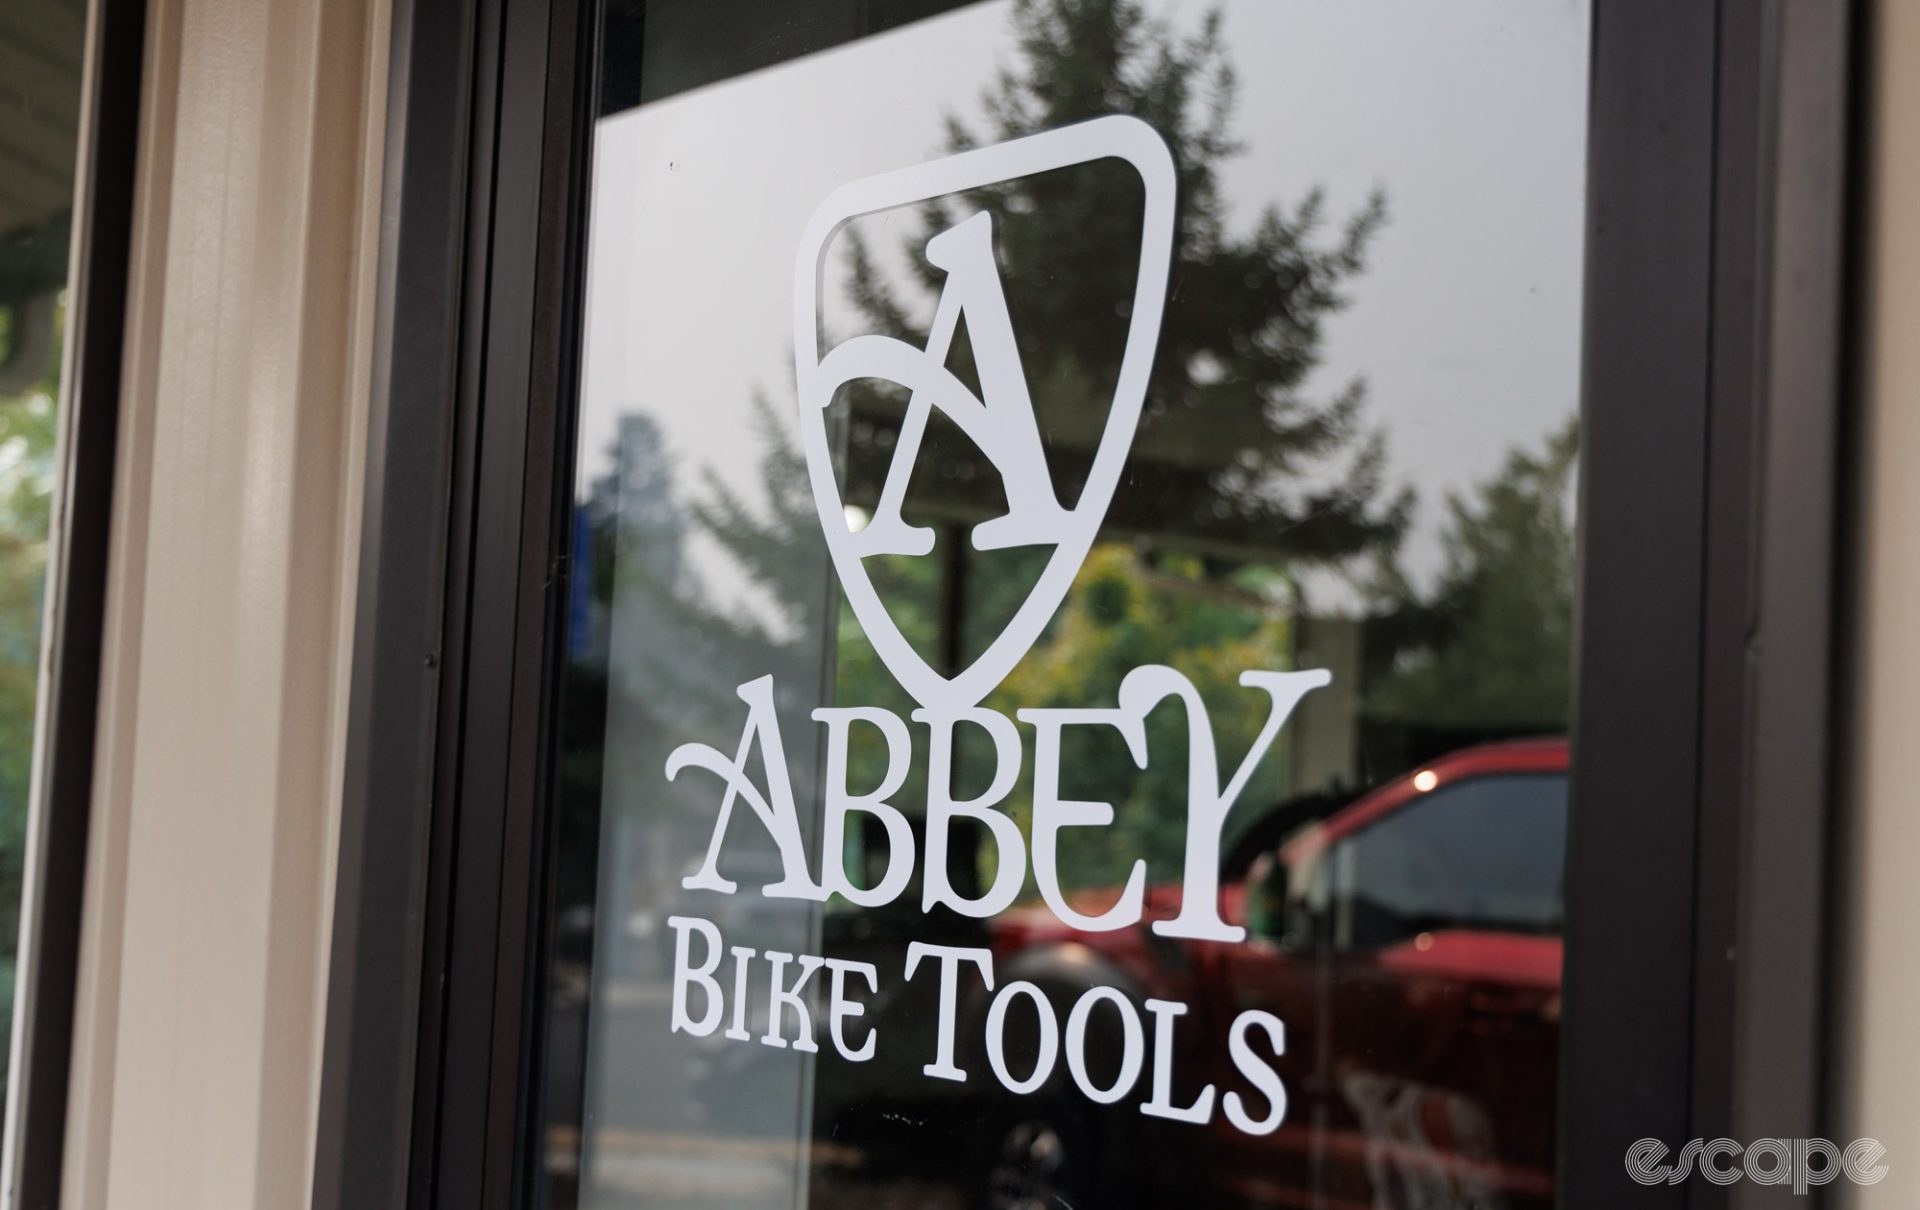 The Abbey Bike Tools logo on the front door.